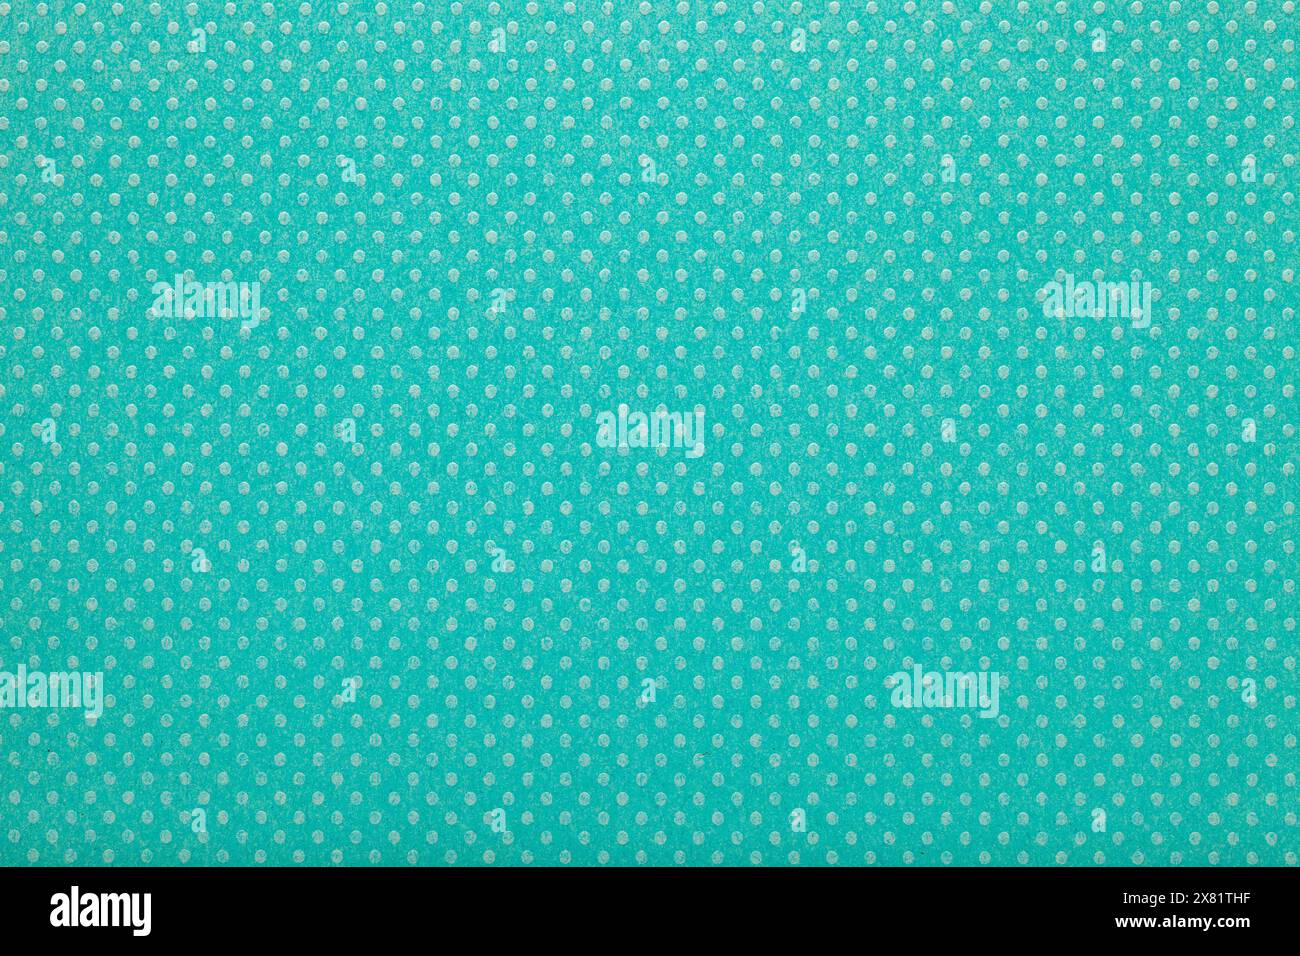 Sea blue background texture with subtle lighter dots pattern Stock Photo